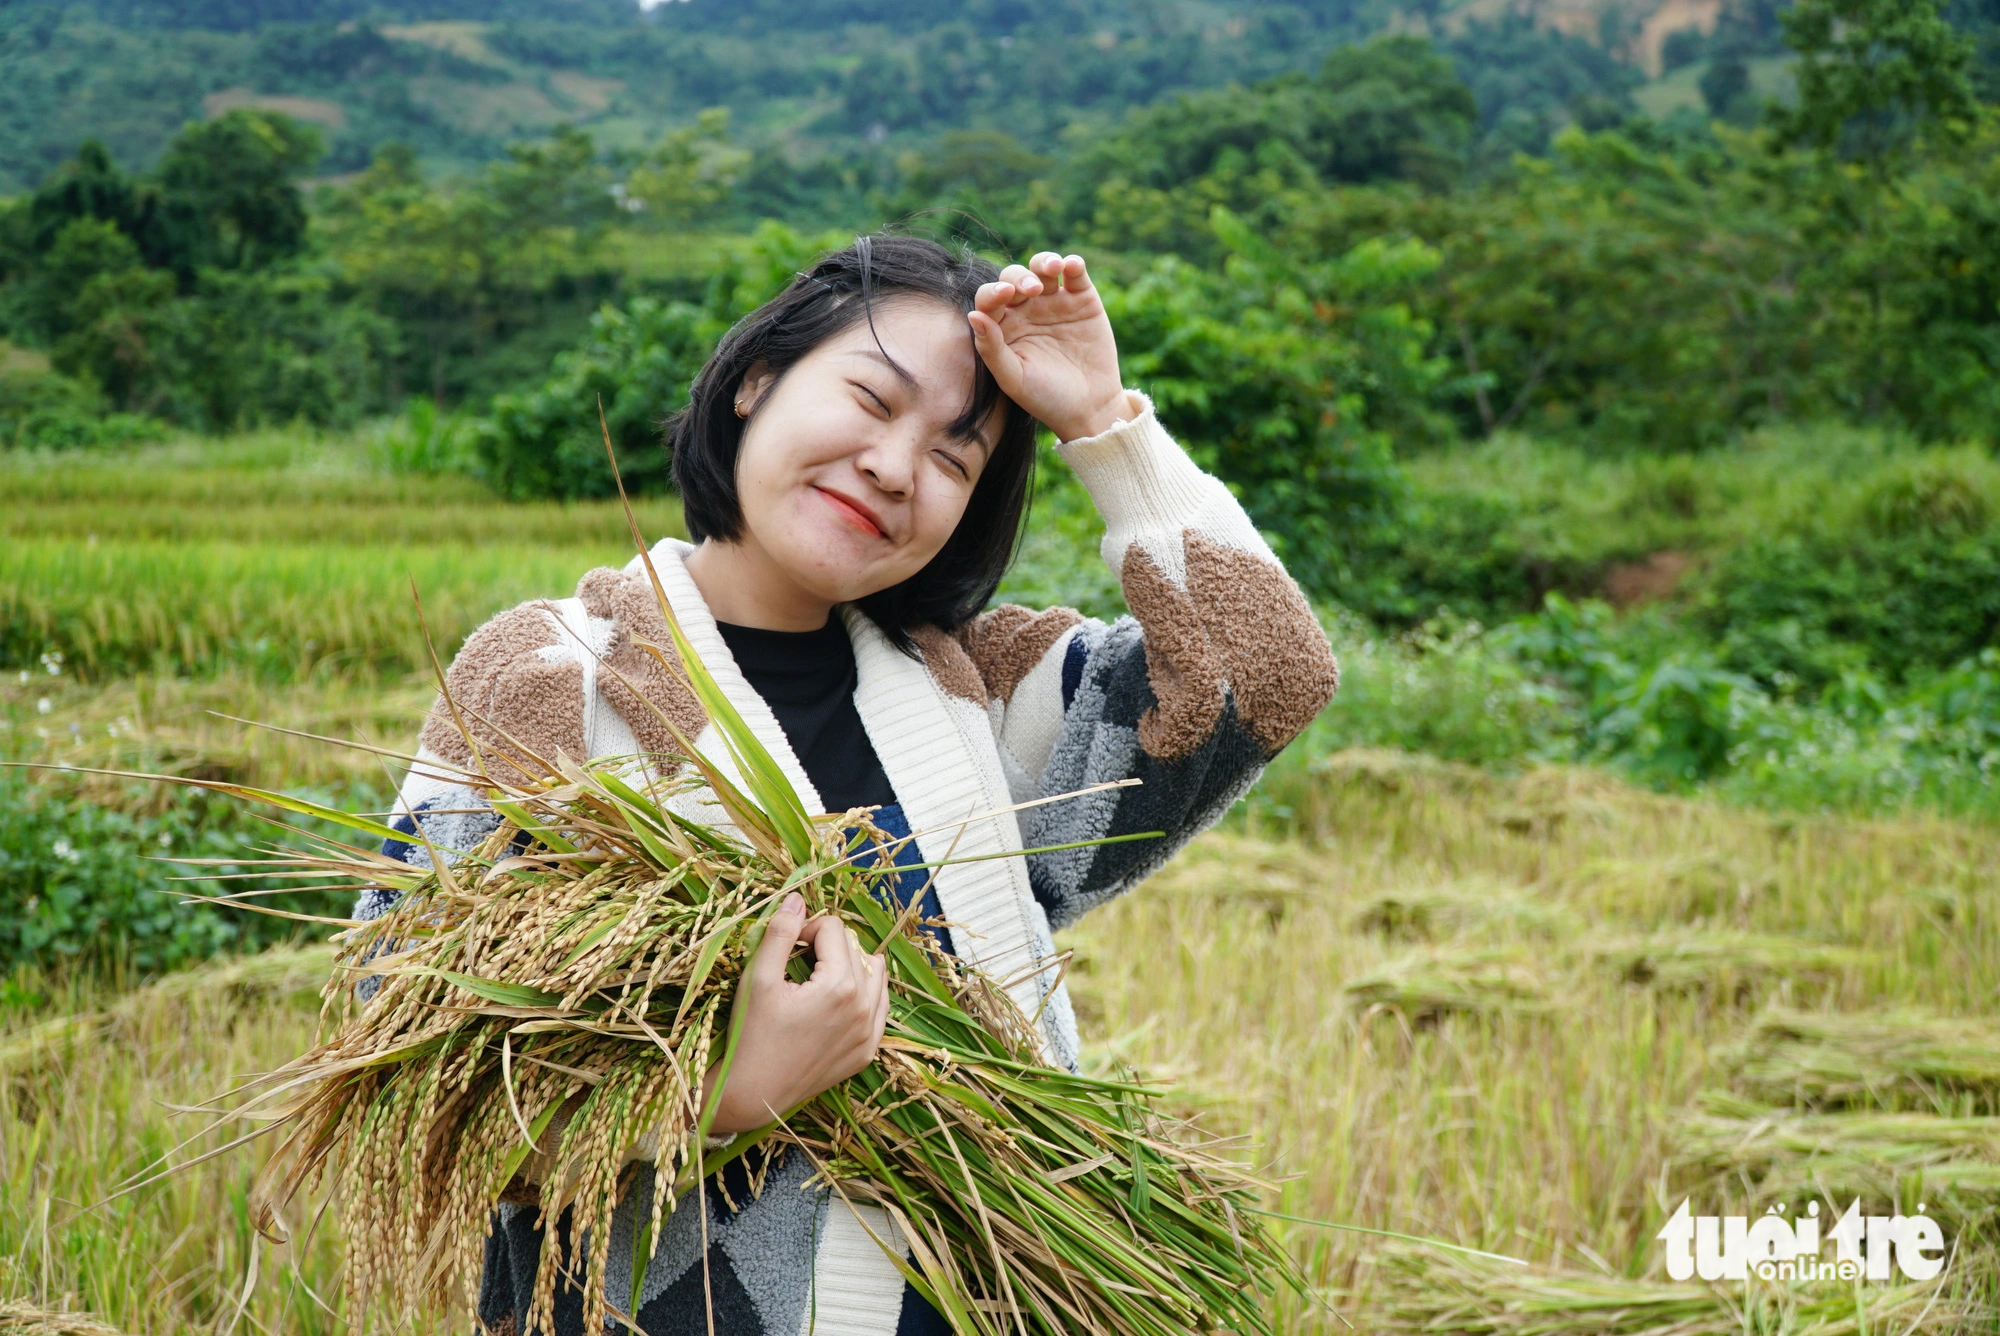 Thu Ha, a tourist from Tay Ho, takes a photo with a sheaf of rice she harvested. Photo: Nguyen Hien / Tuoi Tre